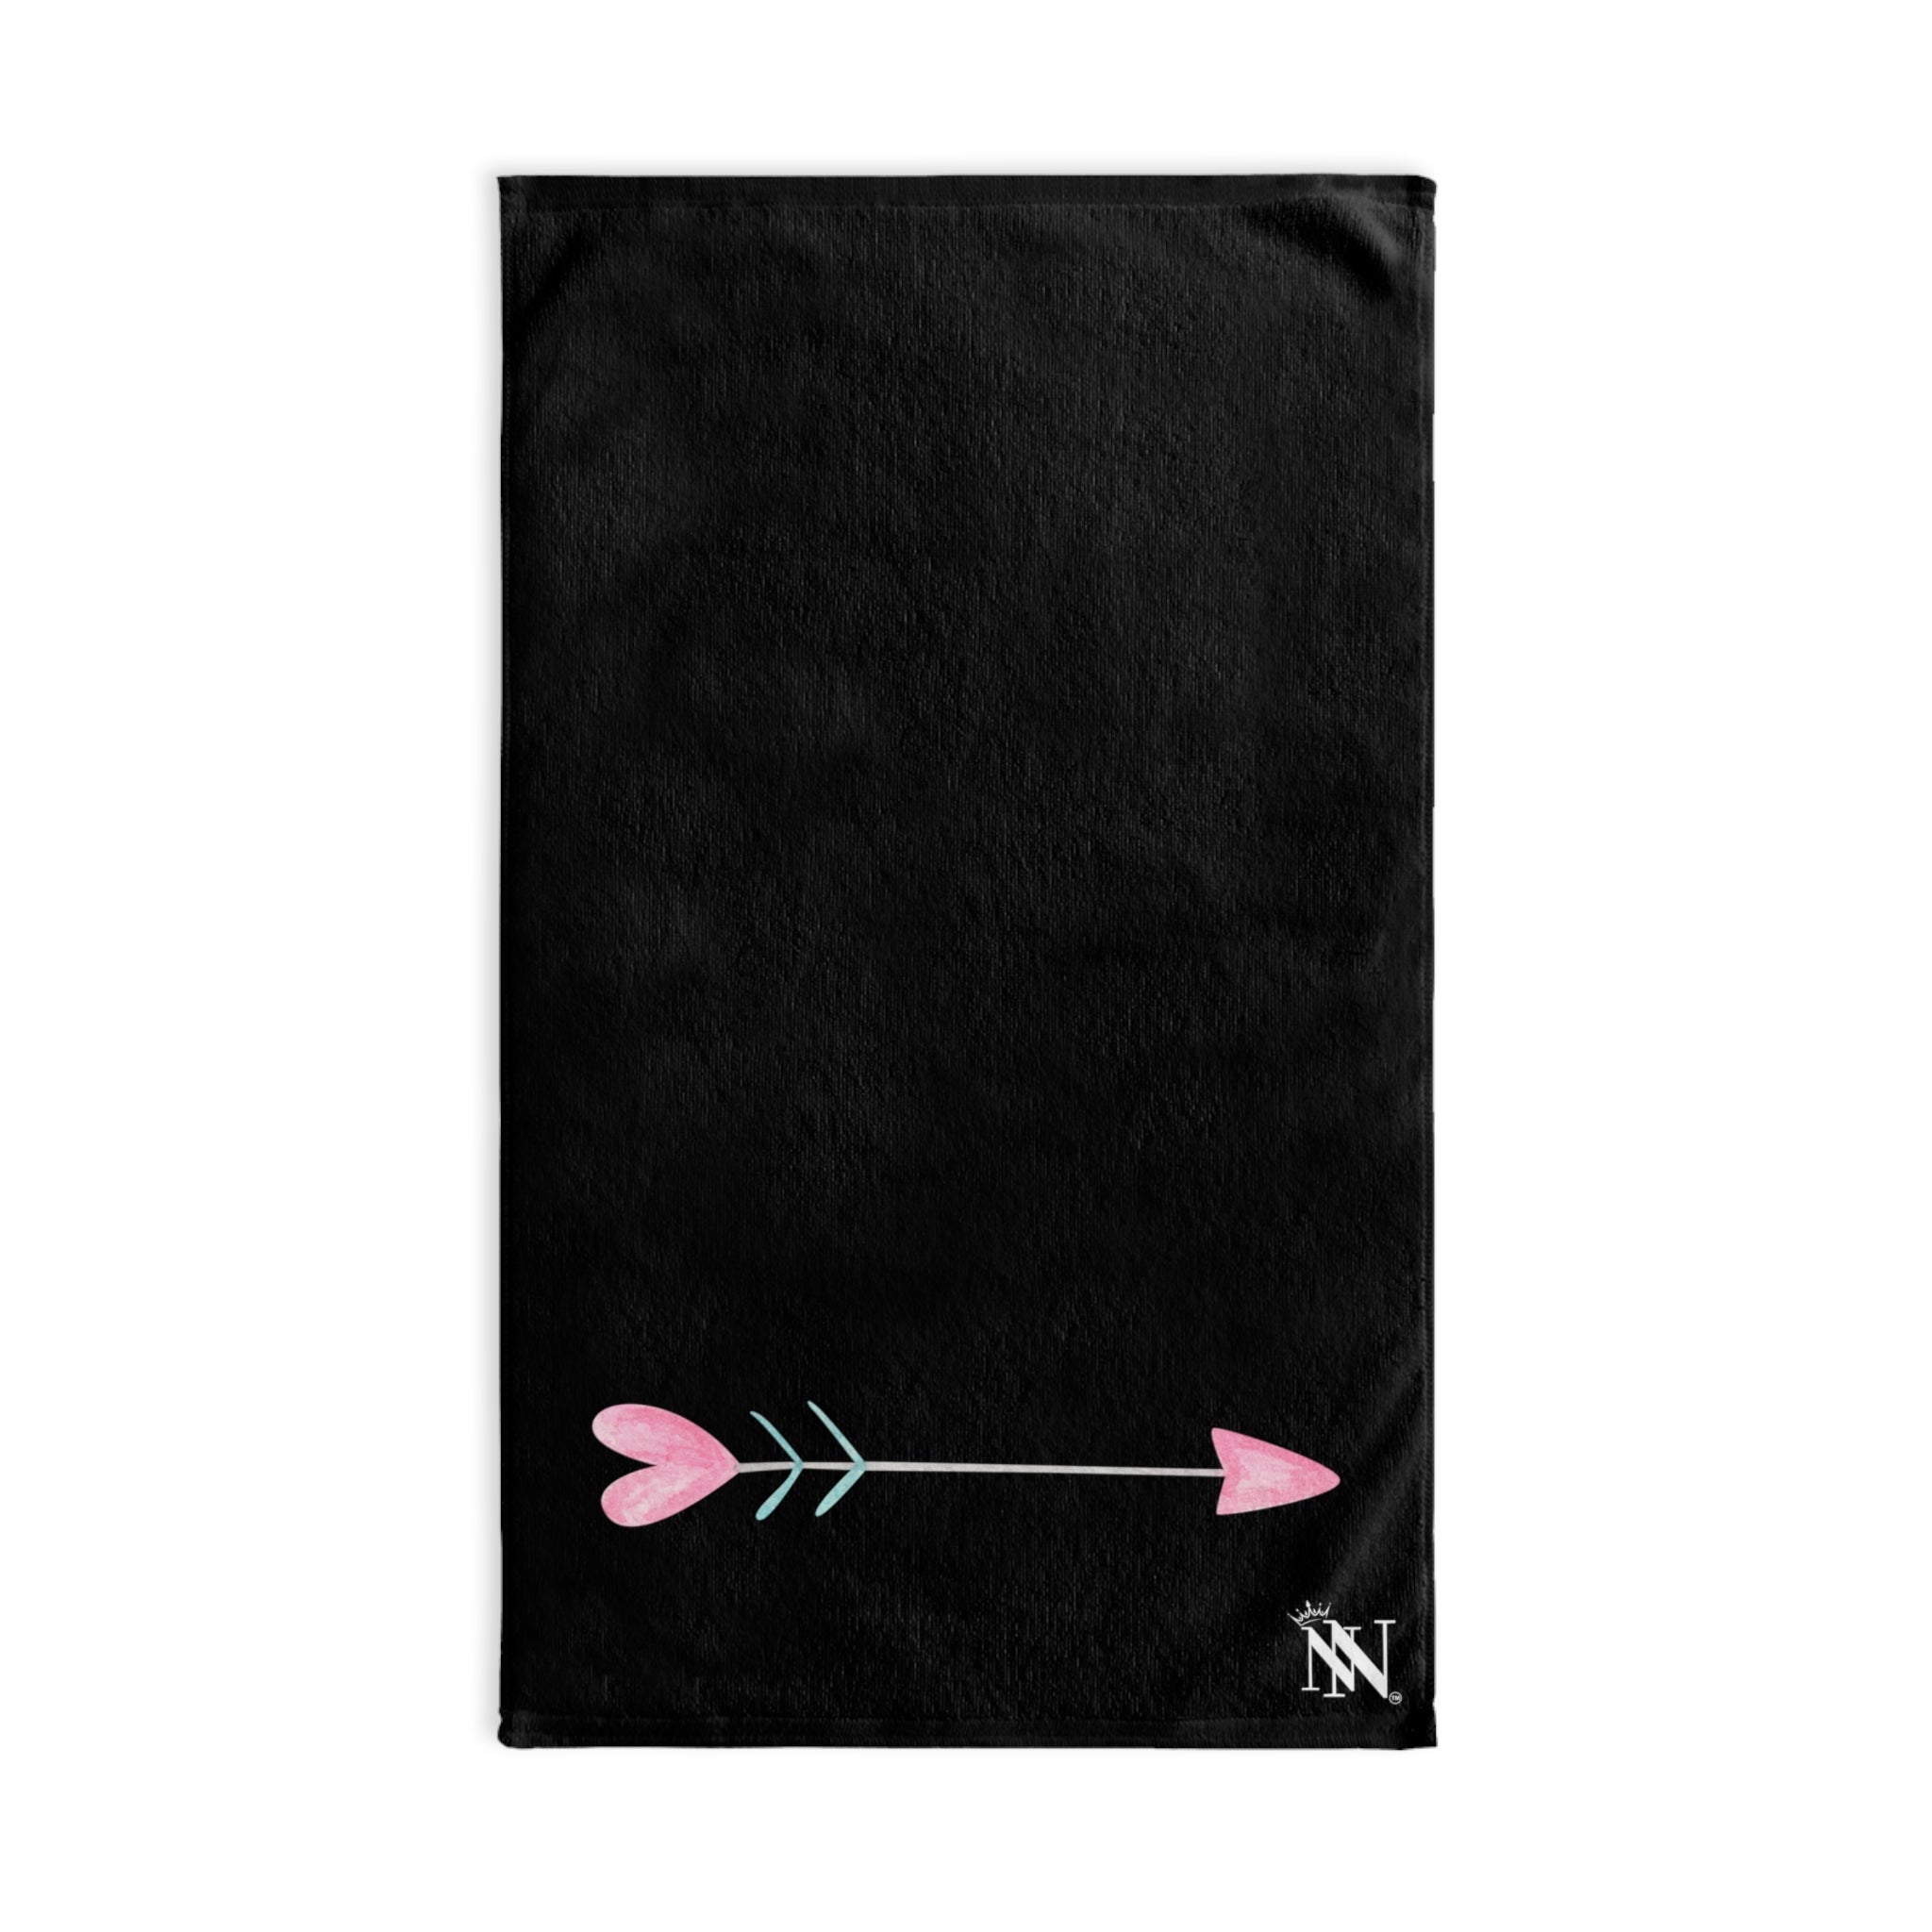 Simple Heart Arrow Black | Sexy Gifts for Boyfriend, Funny Towel Romantic Gift for Wedding Couple Fiance First Year 2nd Anniversary Valentines, Party Gag Gifts, Joke Humor Cloth for Husband Men BF NECTAR NAPKINS